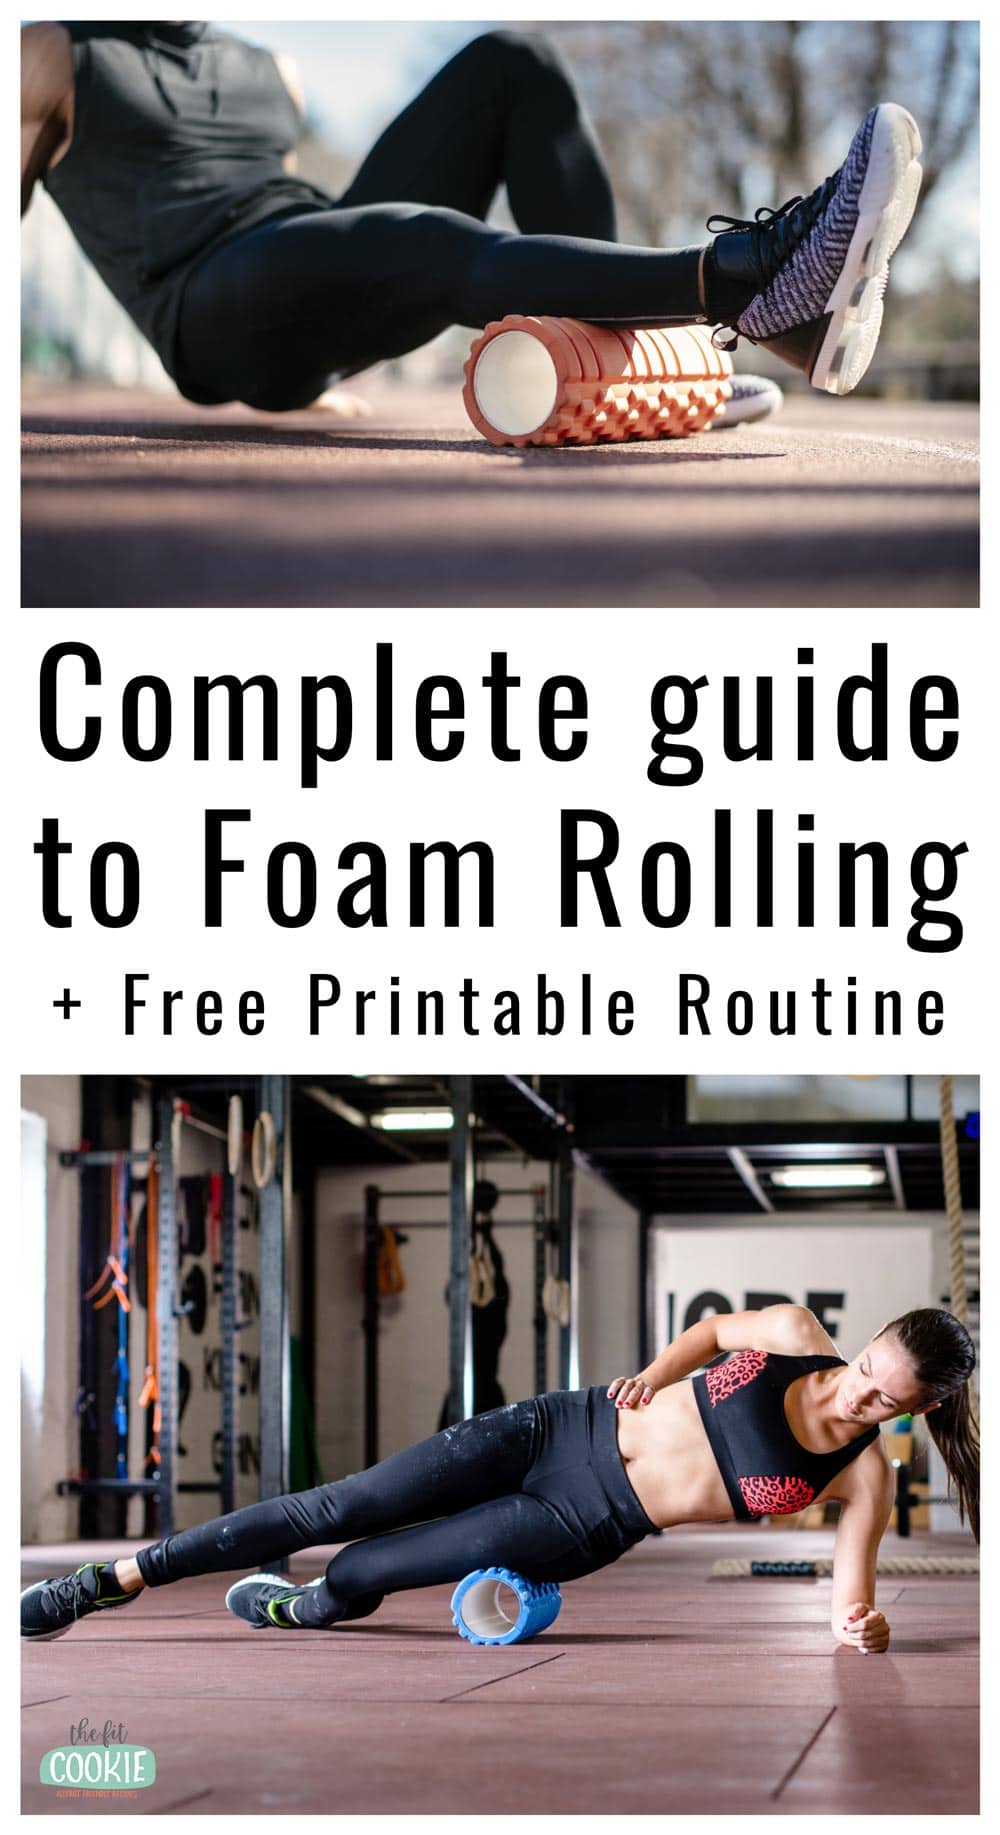 photo collage of man and woman foam rolling with text overlay that says complete guide to foam rolling + free printable routine